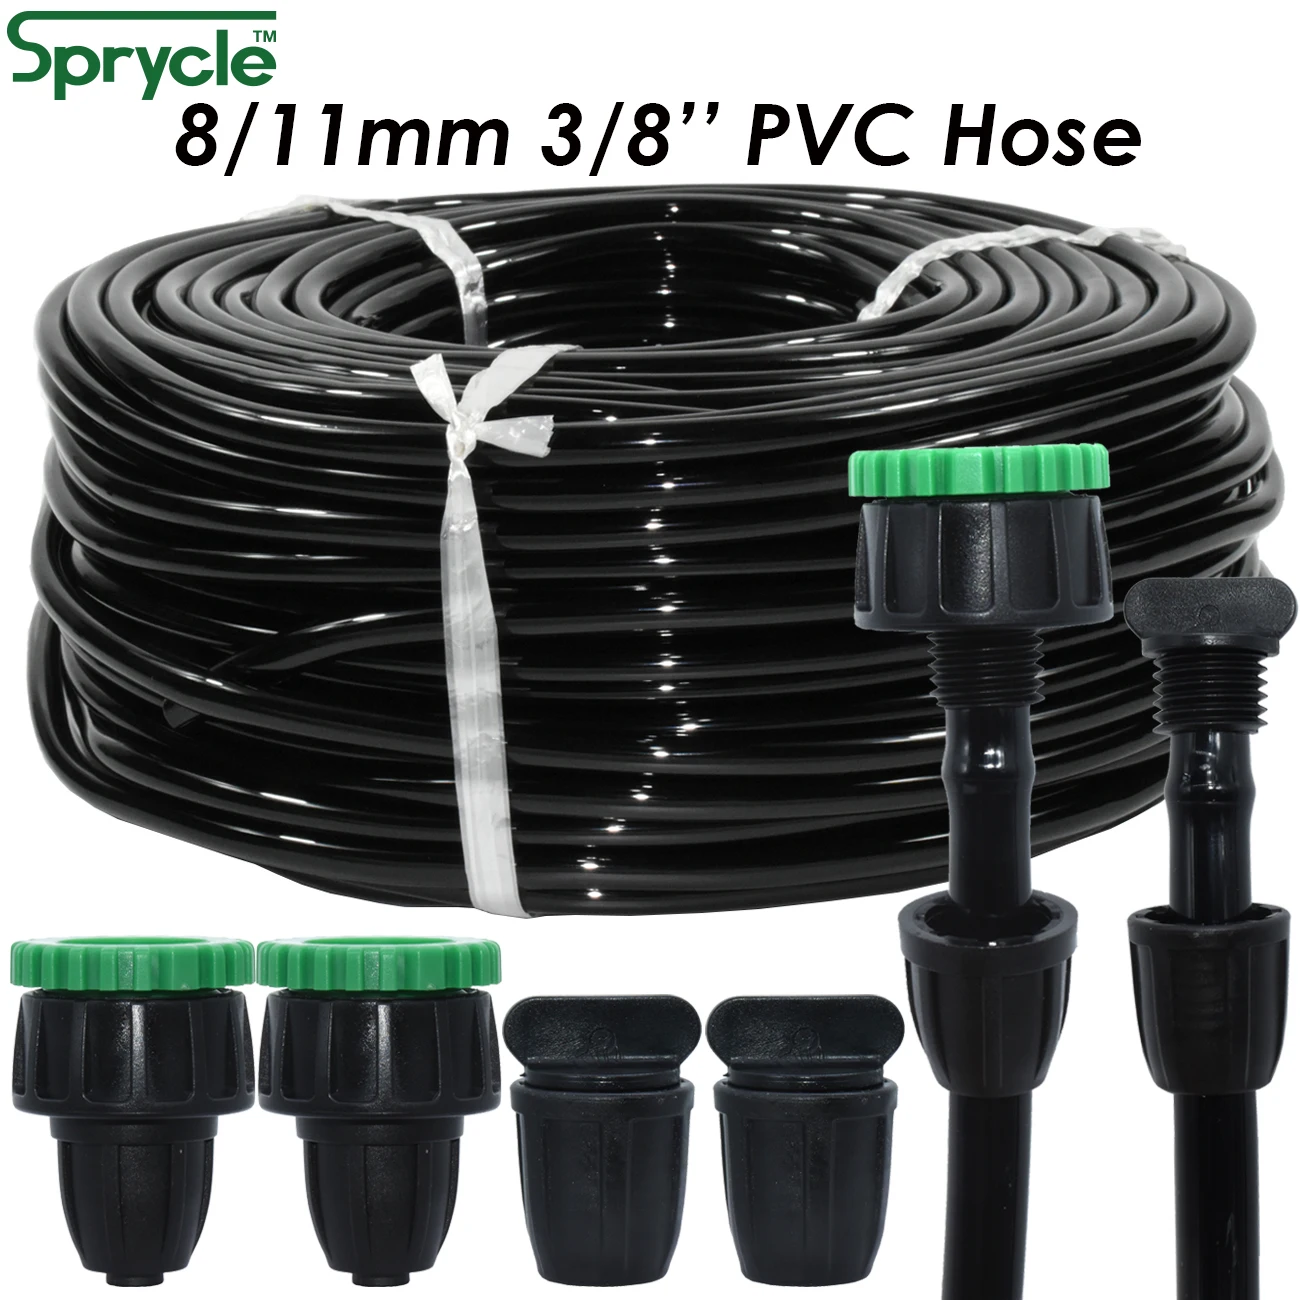 

SPRYCLE 5-25M 8/11mm Garden Watering PVC Hose 3/8'' Tubing Drip Irrigation Pipe 1/2&3/4'' Quick Connector End Plug for Plant Pot